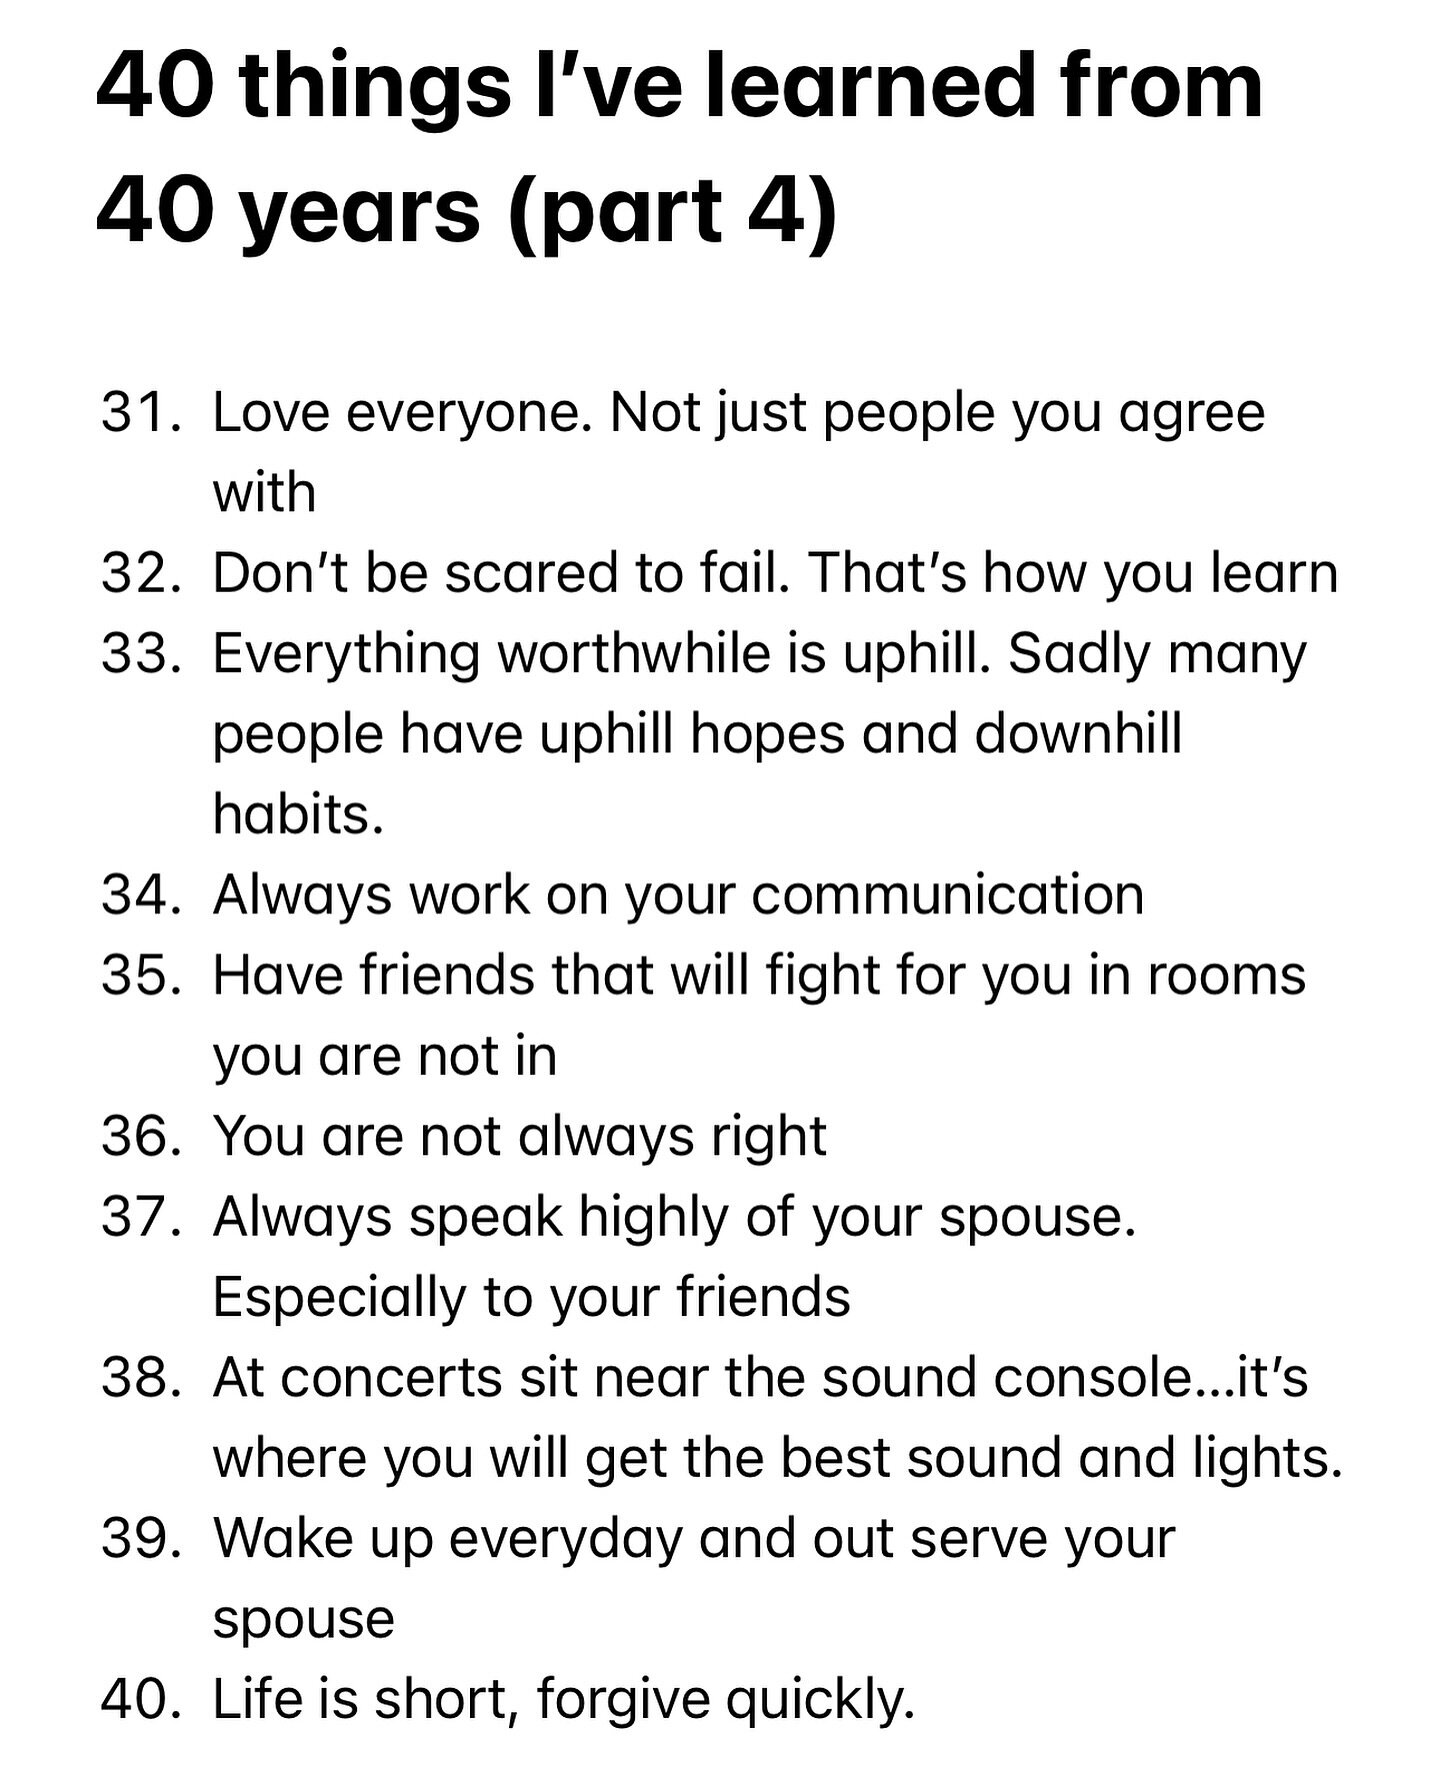 Part 4 of 40 things I&rsquo;ve learned in 40 years of being alive.